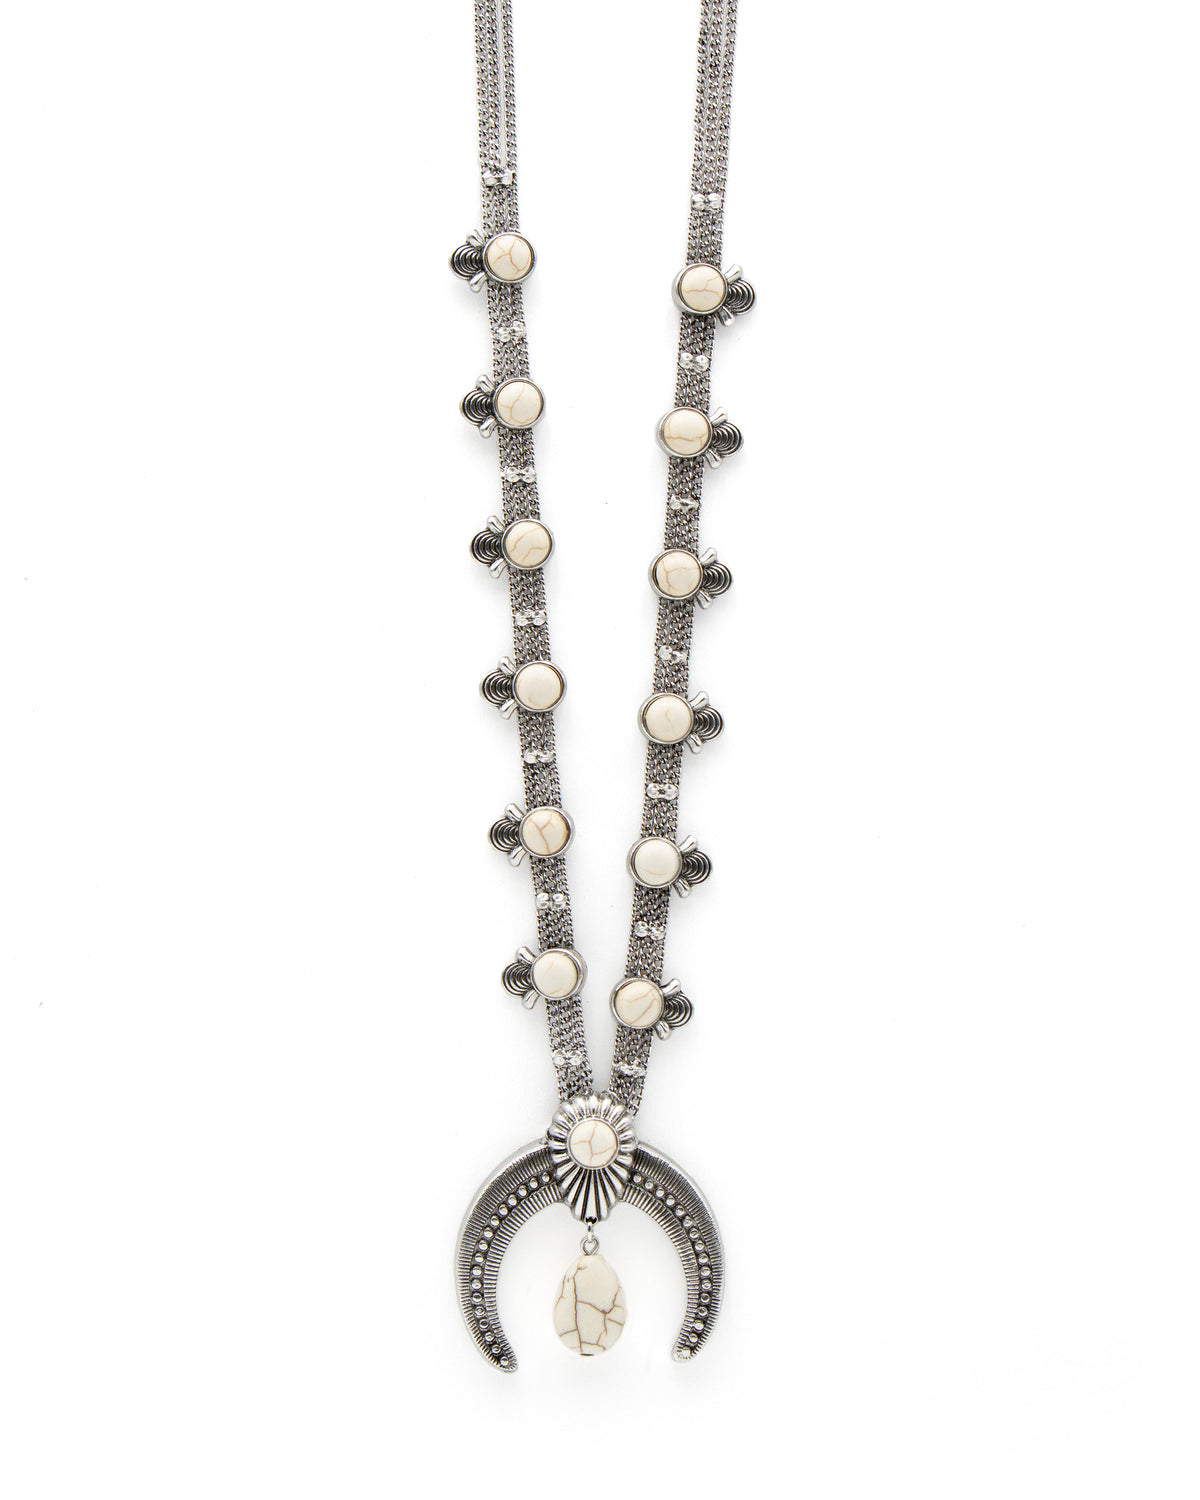 Lovelier Than Ever Necklace